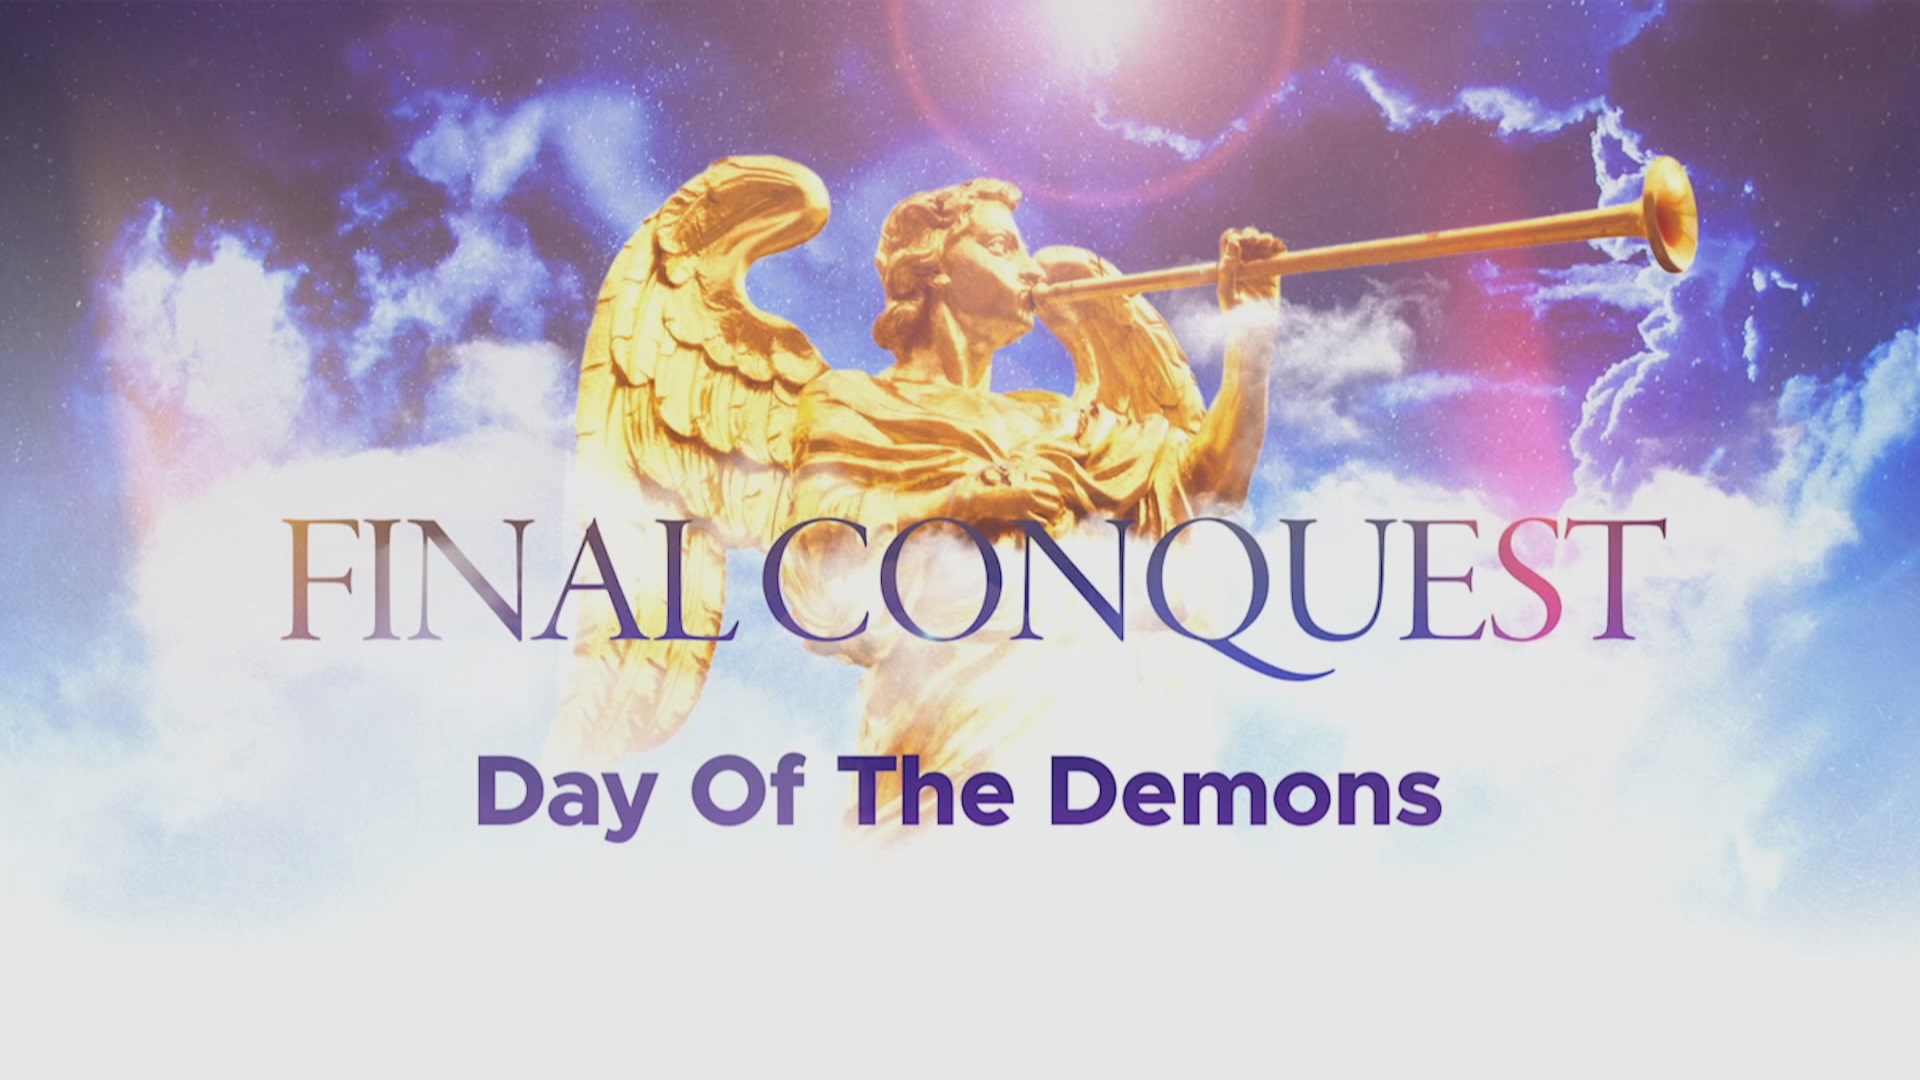 Day Of The Demons